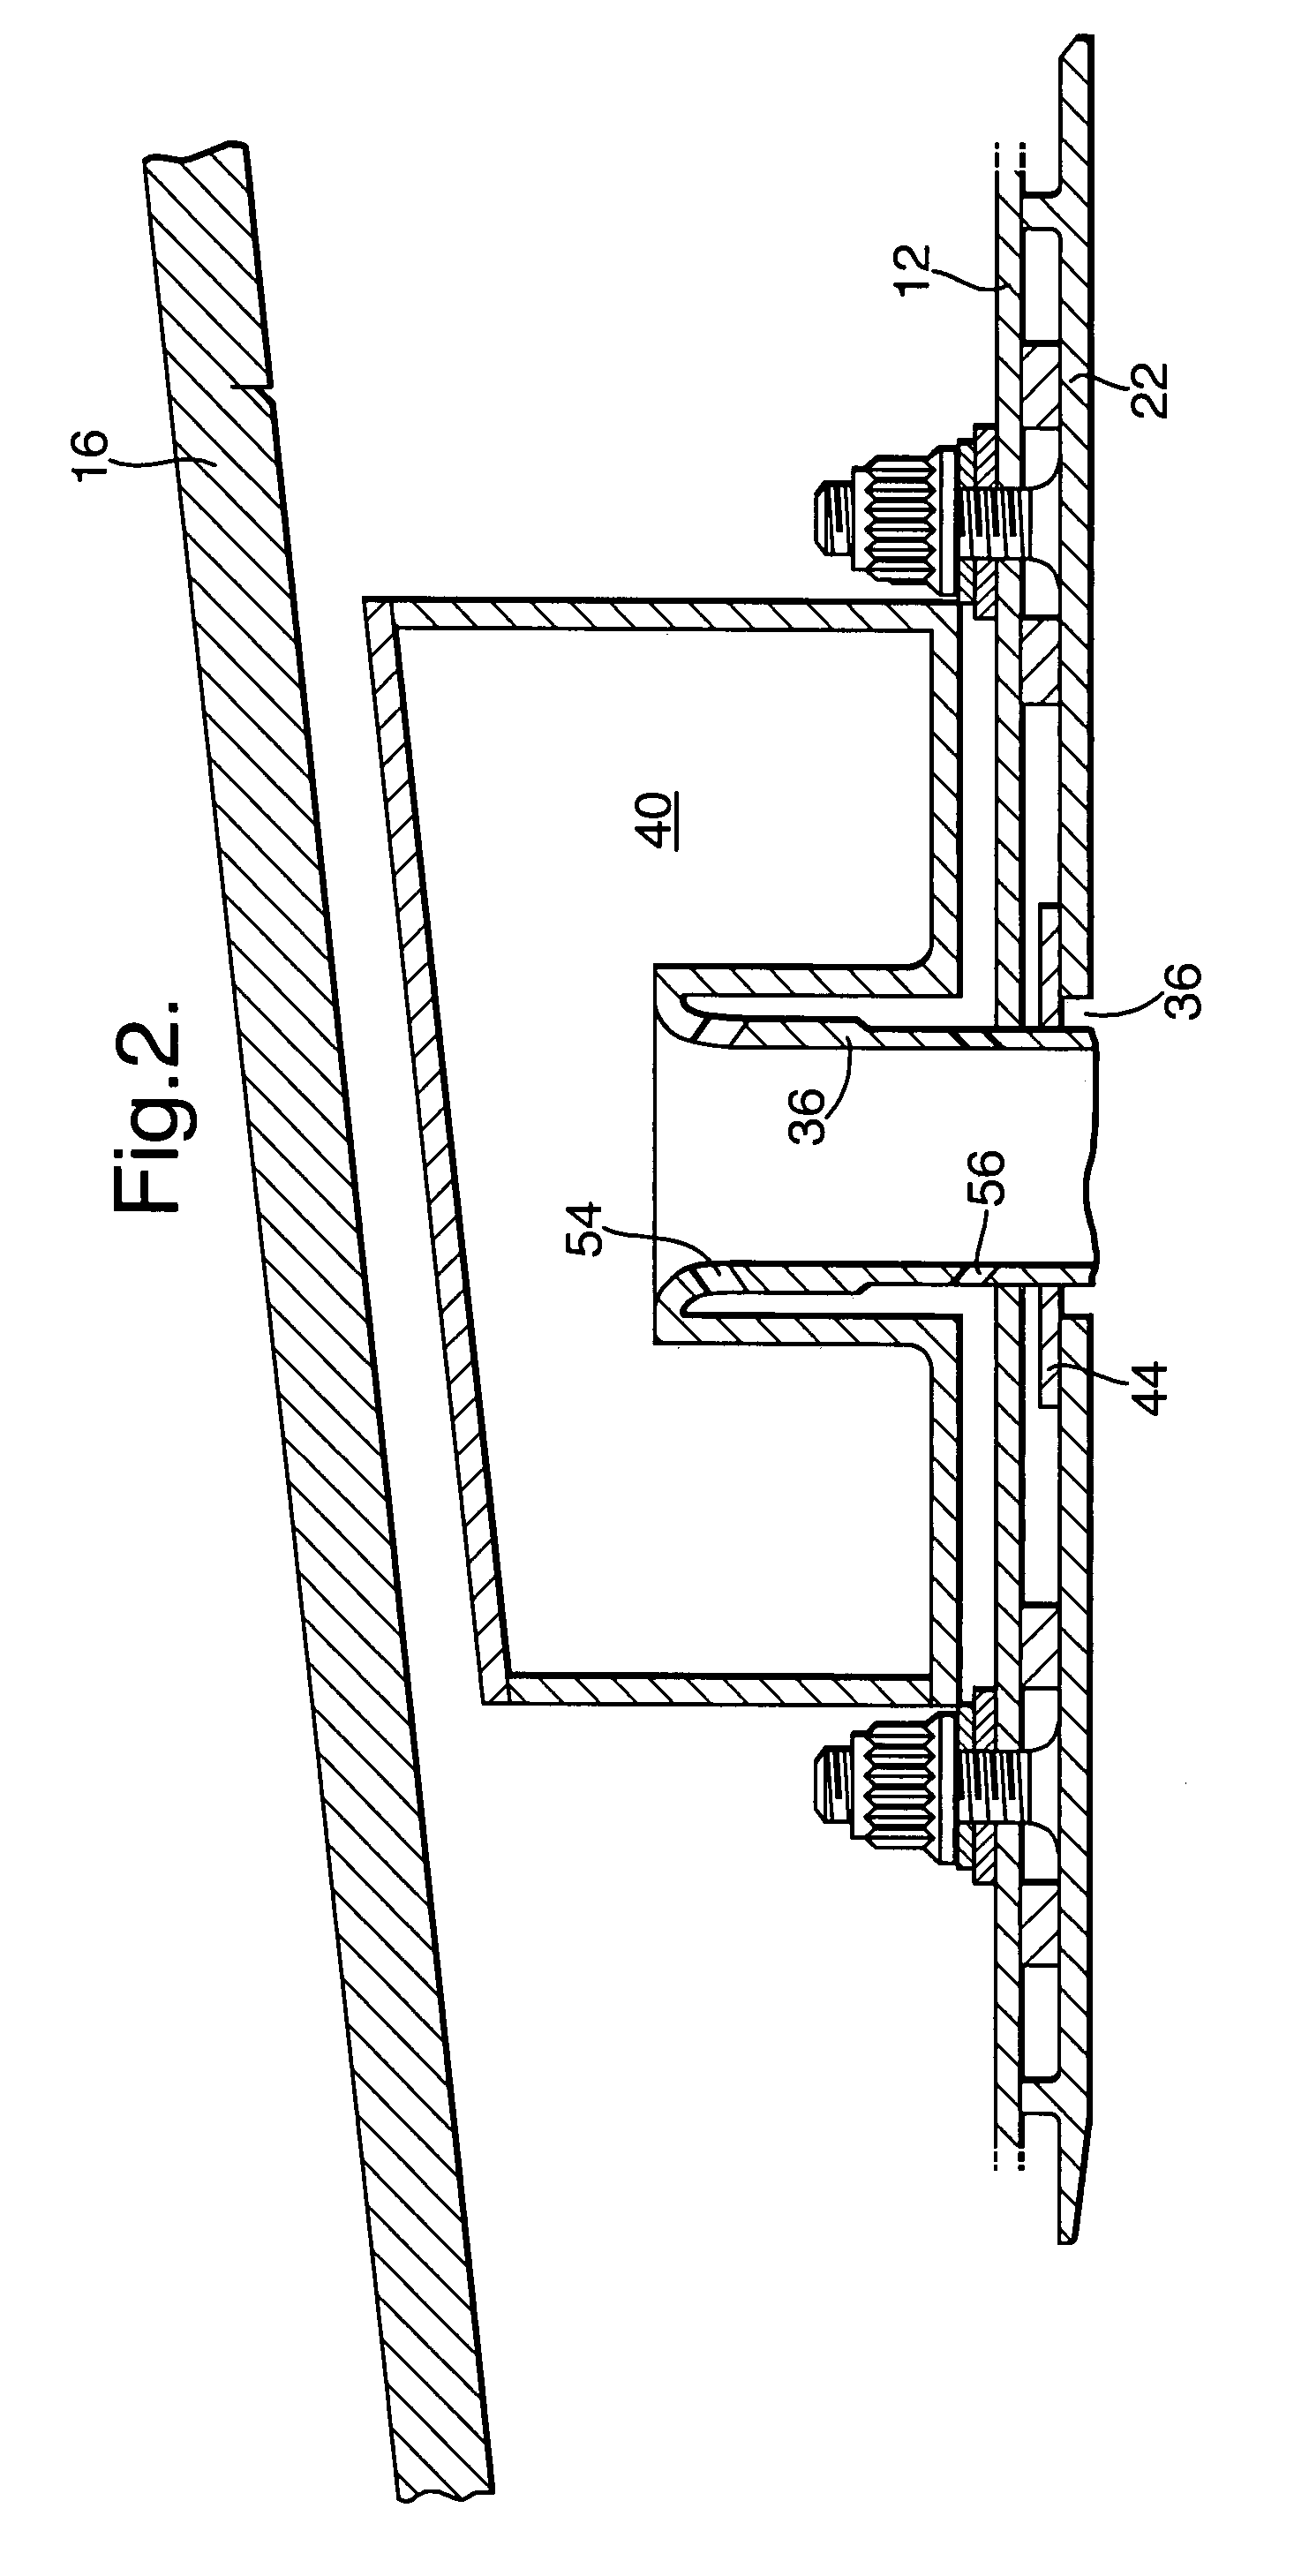 Combustion chamber for a gas turbine engine